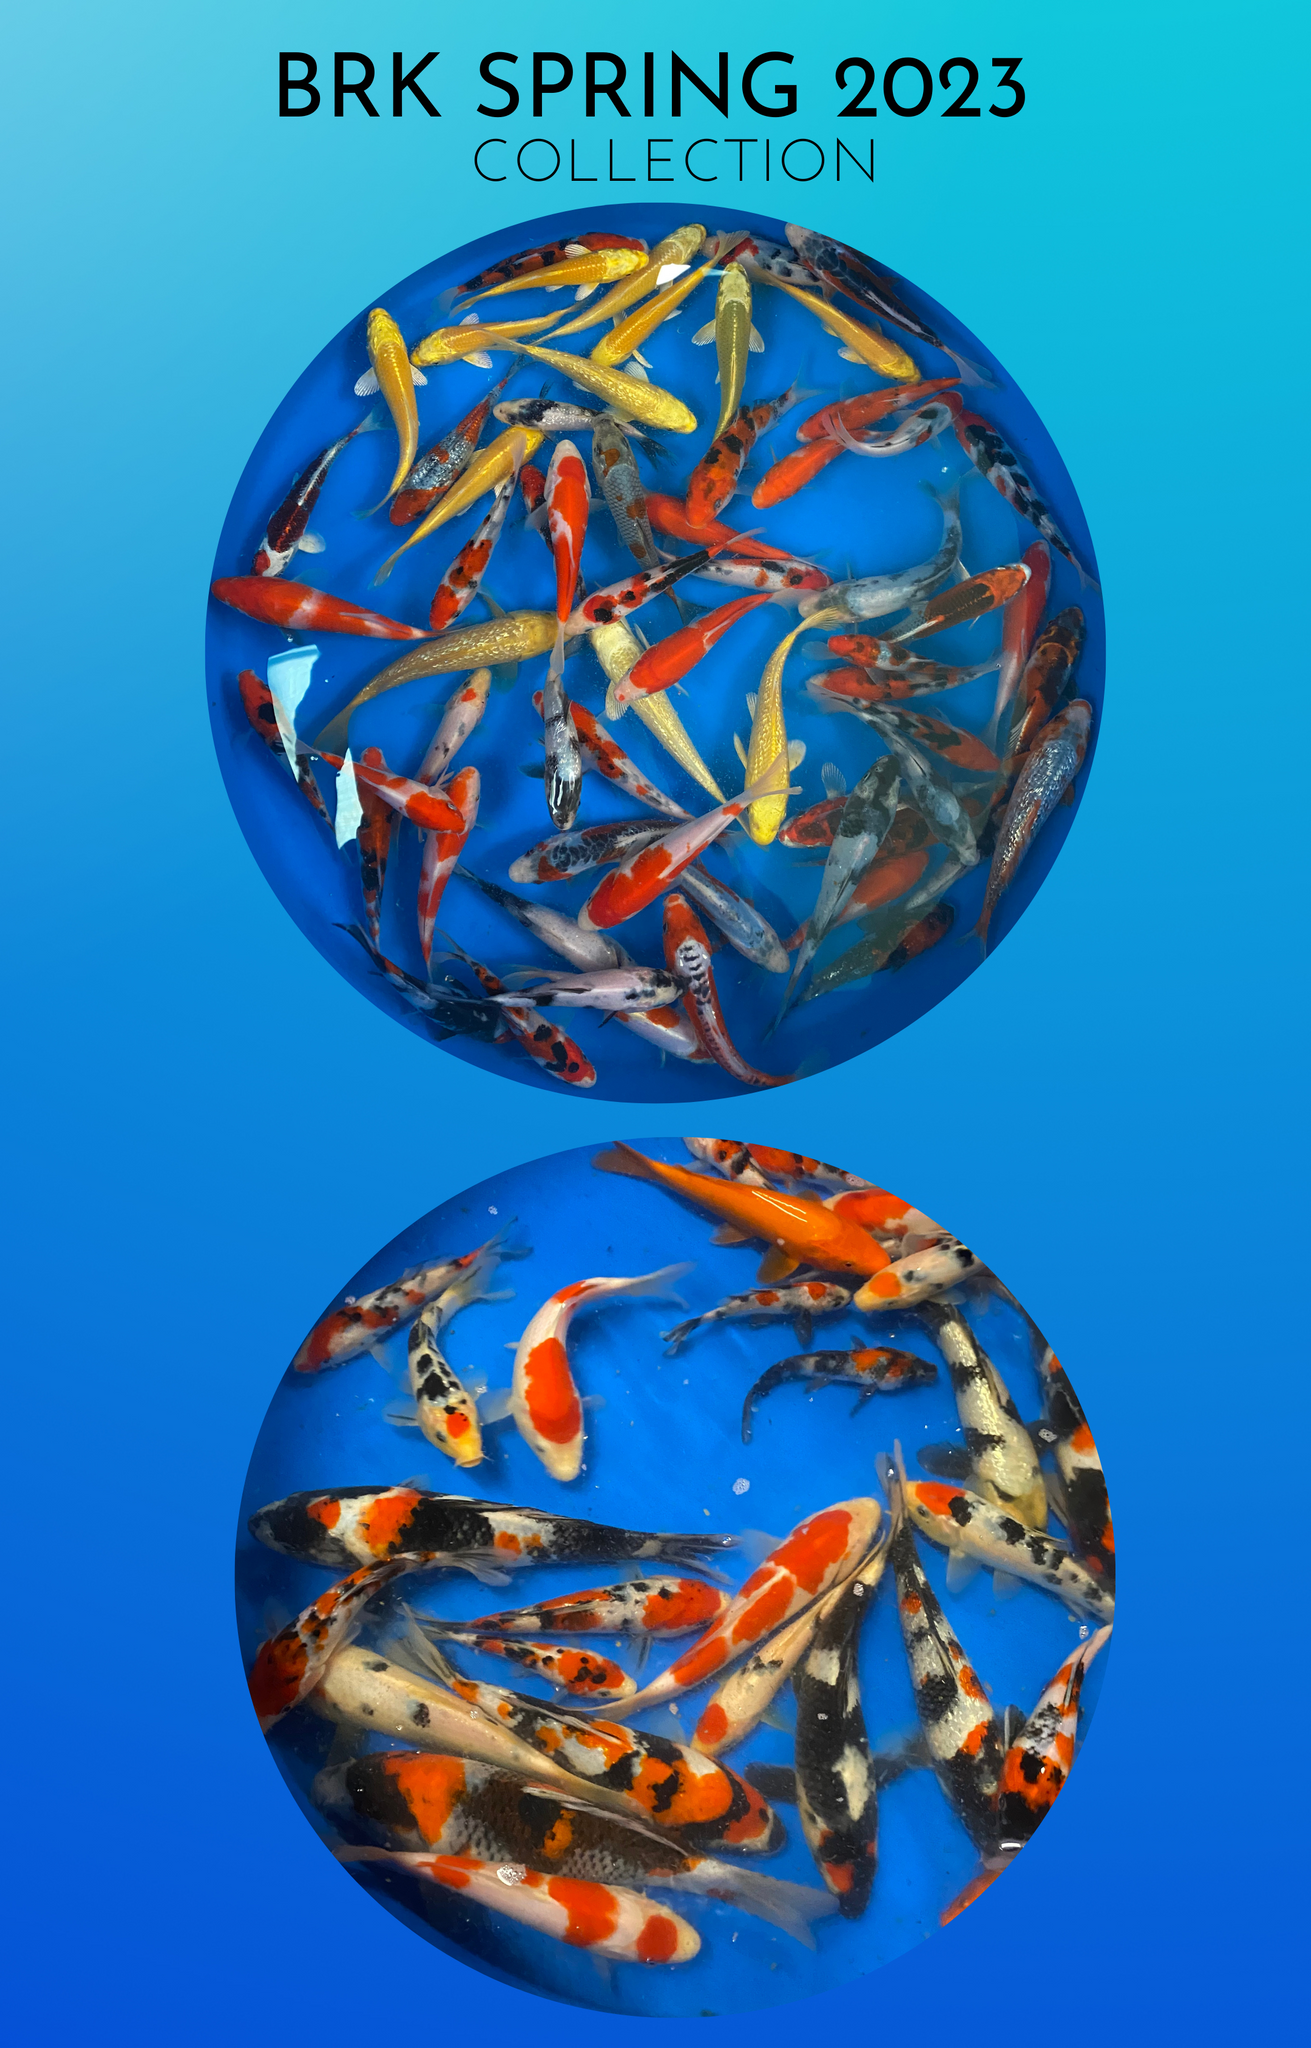 bLUE RIBBON KOI IMAGE OF SPRING 2023 COLLECTION , HUINDREDS OF KOI IN VIEWING BOWLS